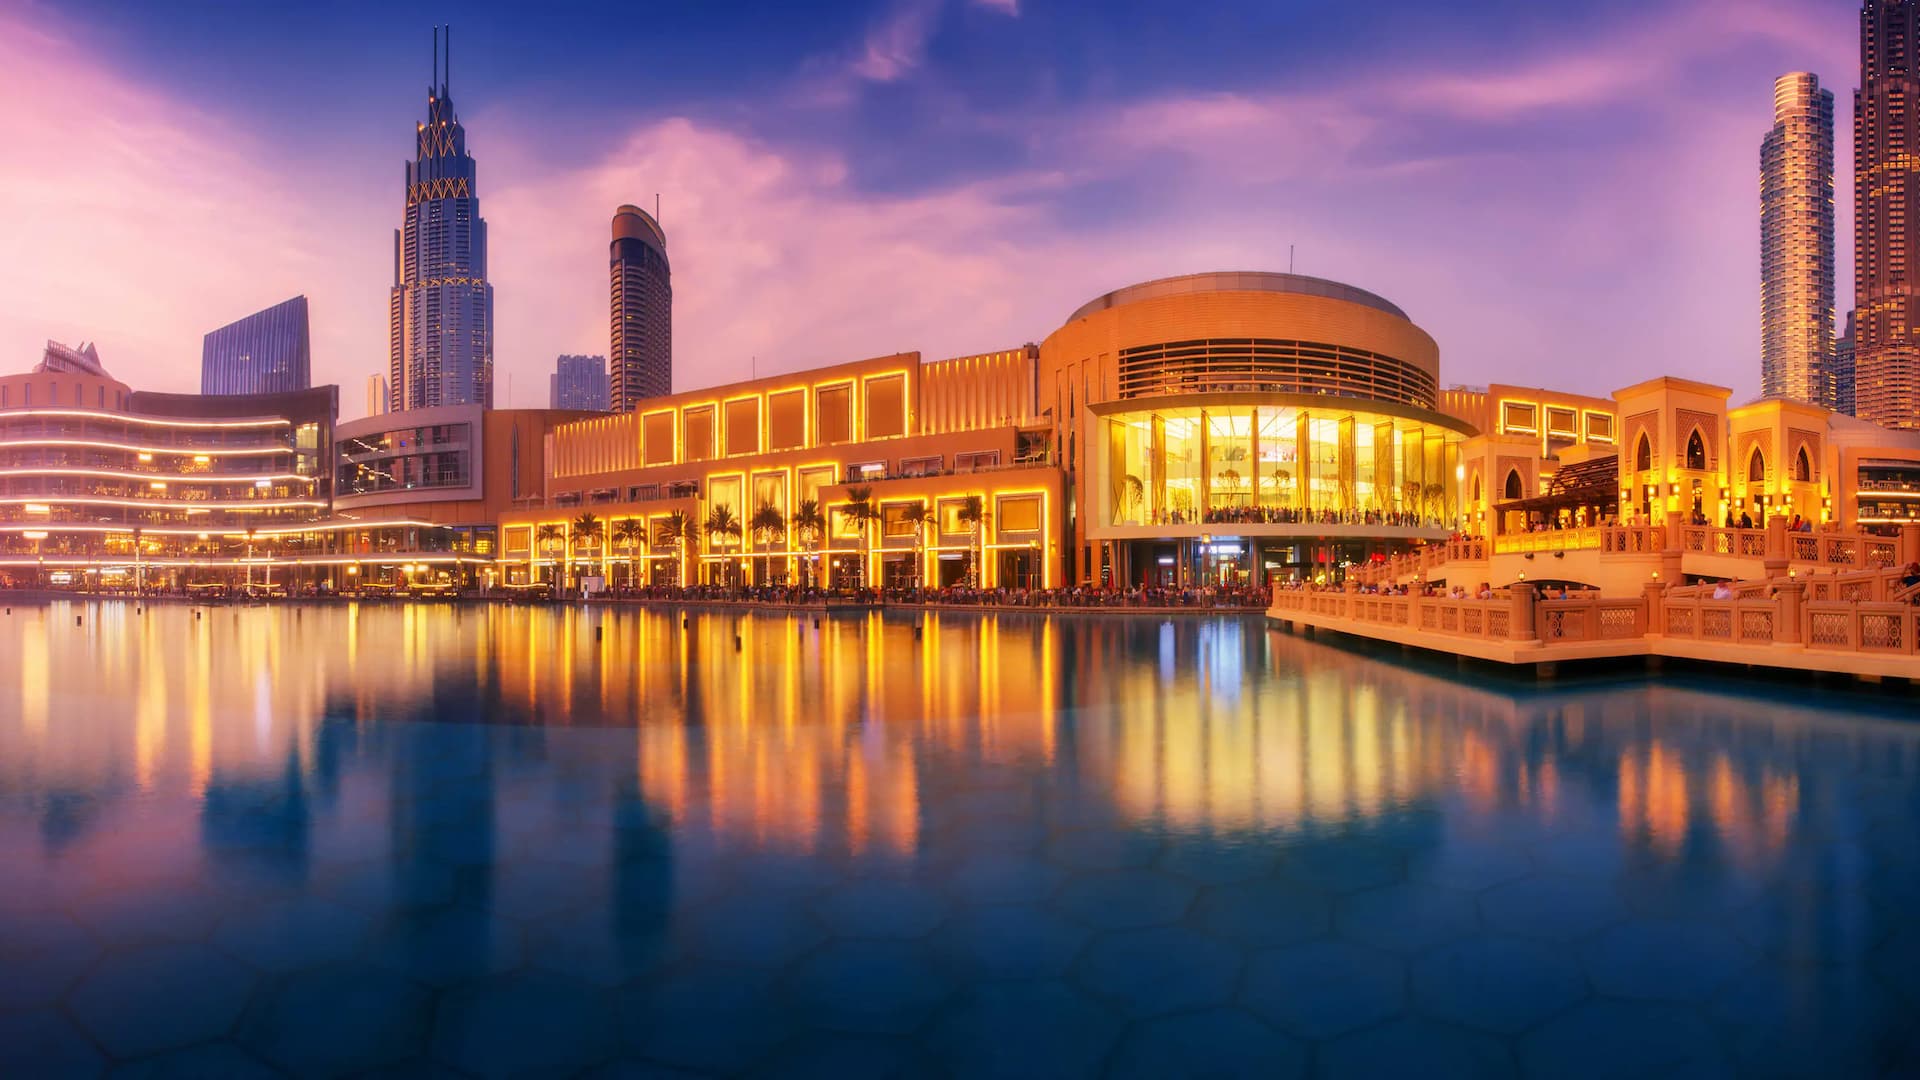 Dubai Mall tops the rating of popular attractions in Dubai